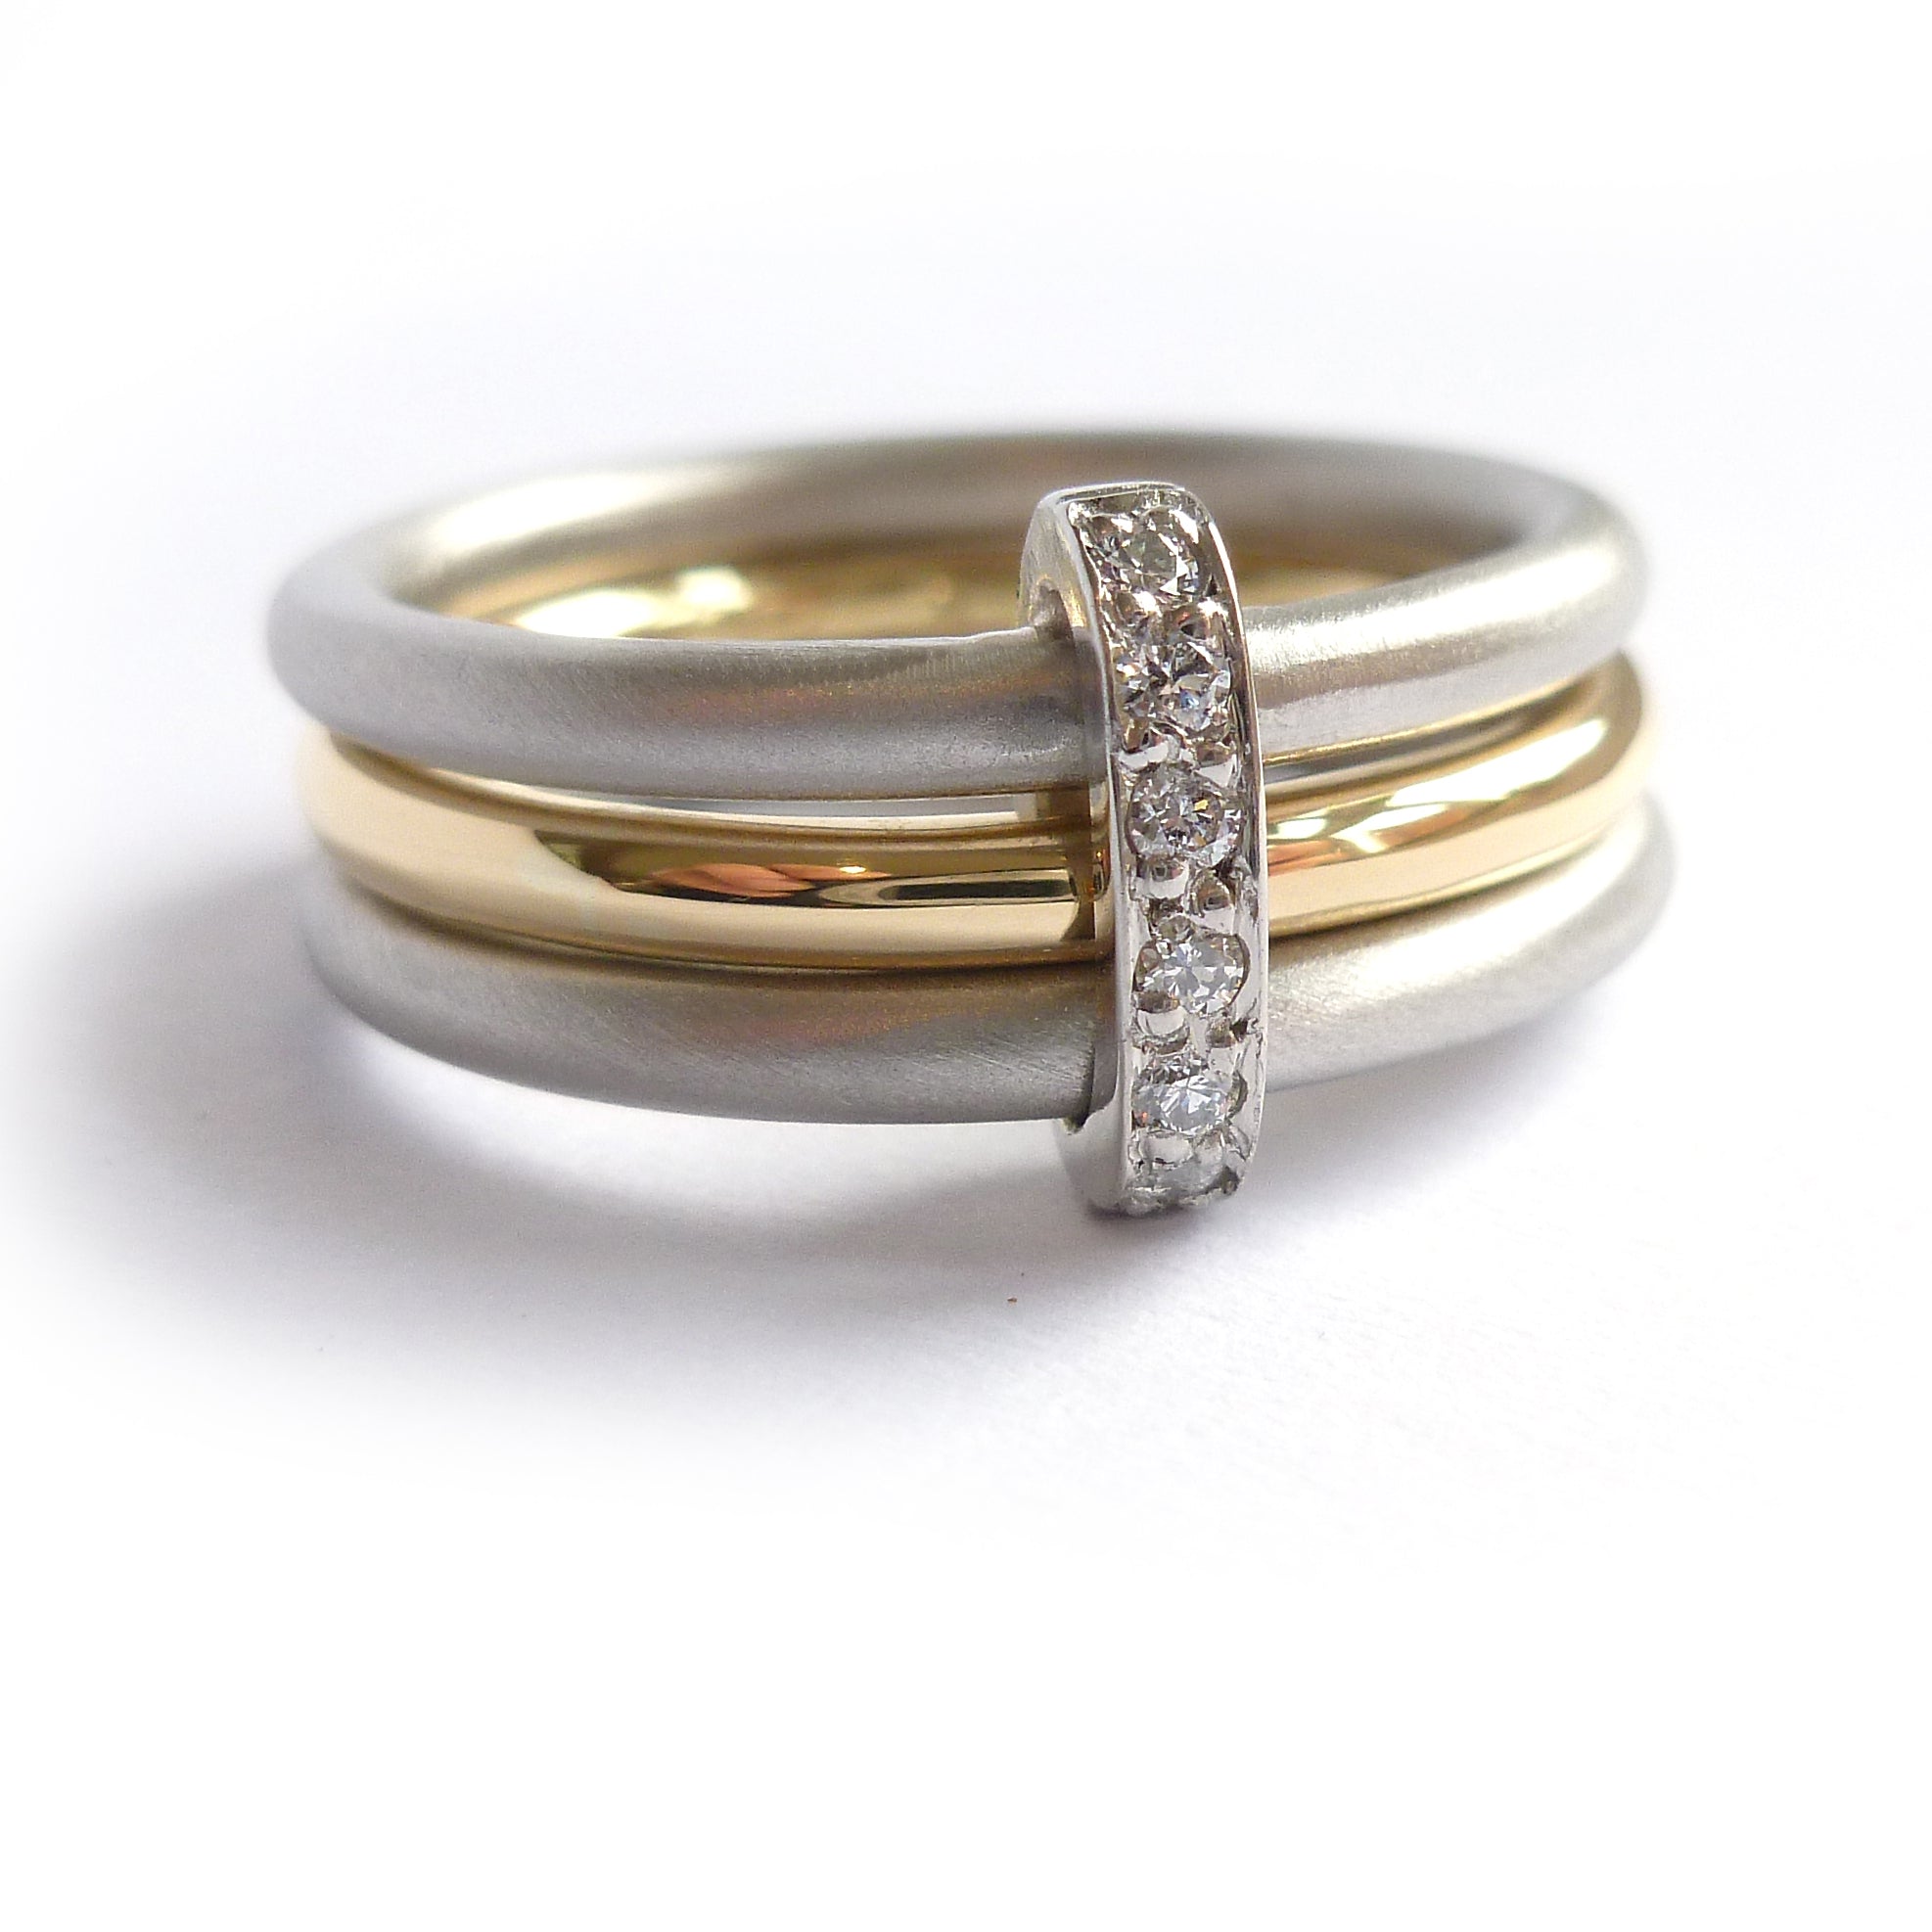 Modern platinum and gold two tone, white and yellow three band ring with diamonds. Multi band ring or interlocking ring, sometimes called triple band rings too.